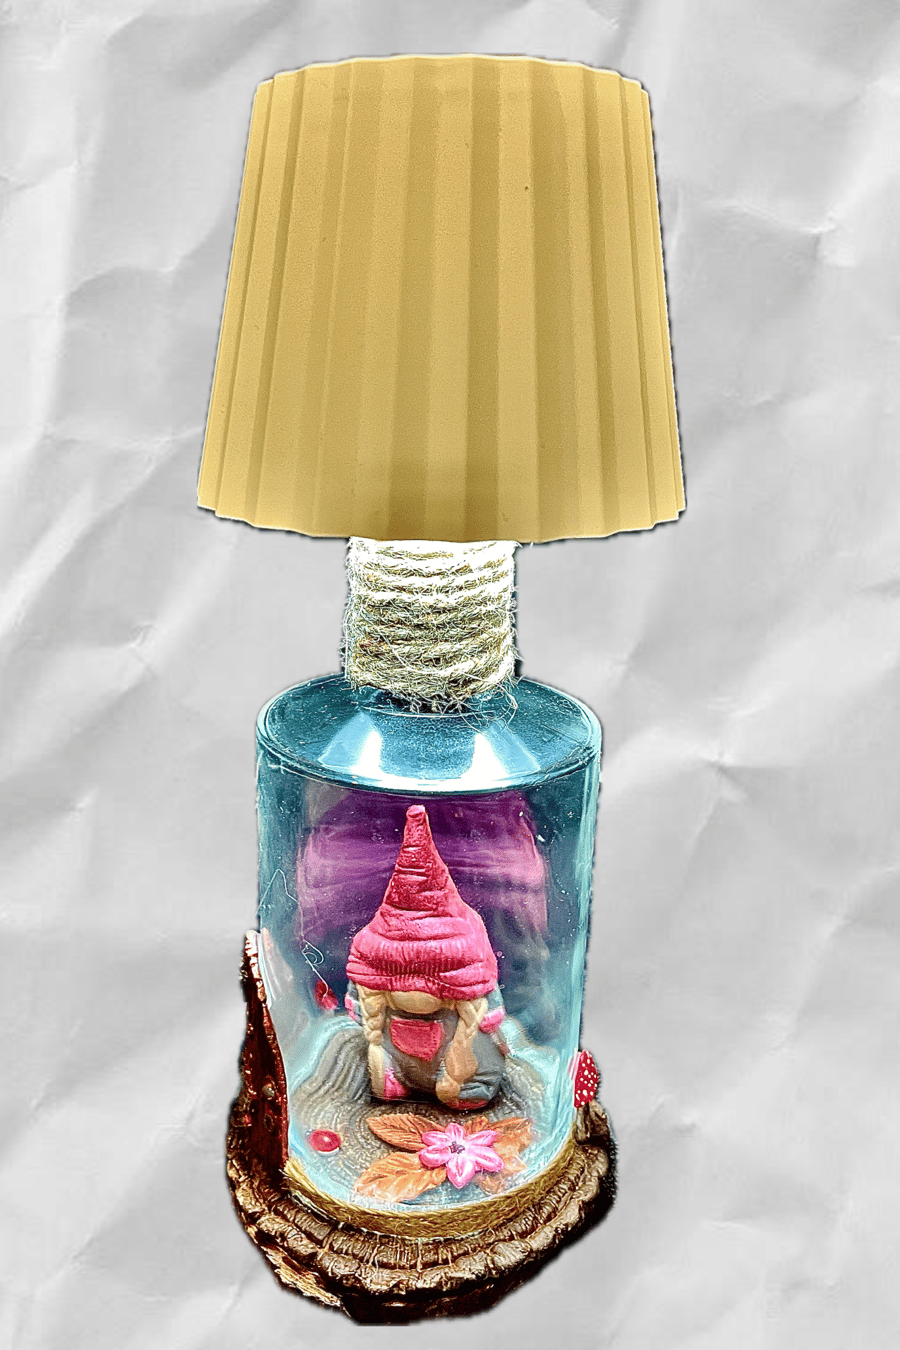 Bottle lamp with cute gonk